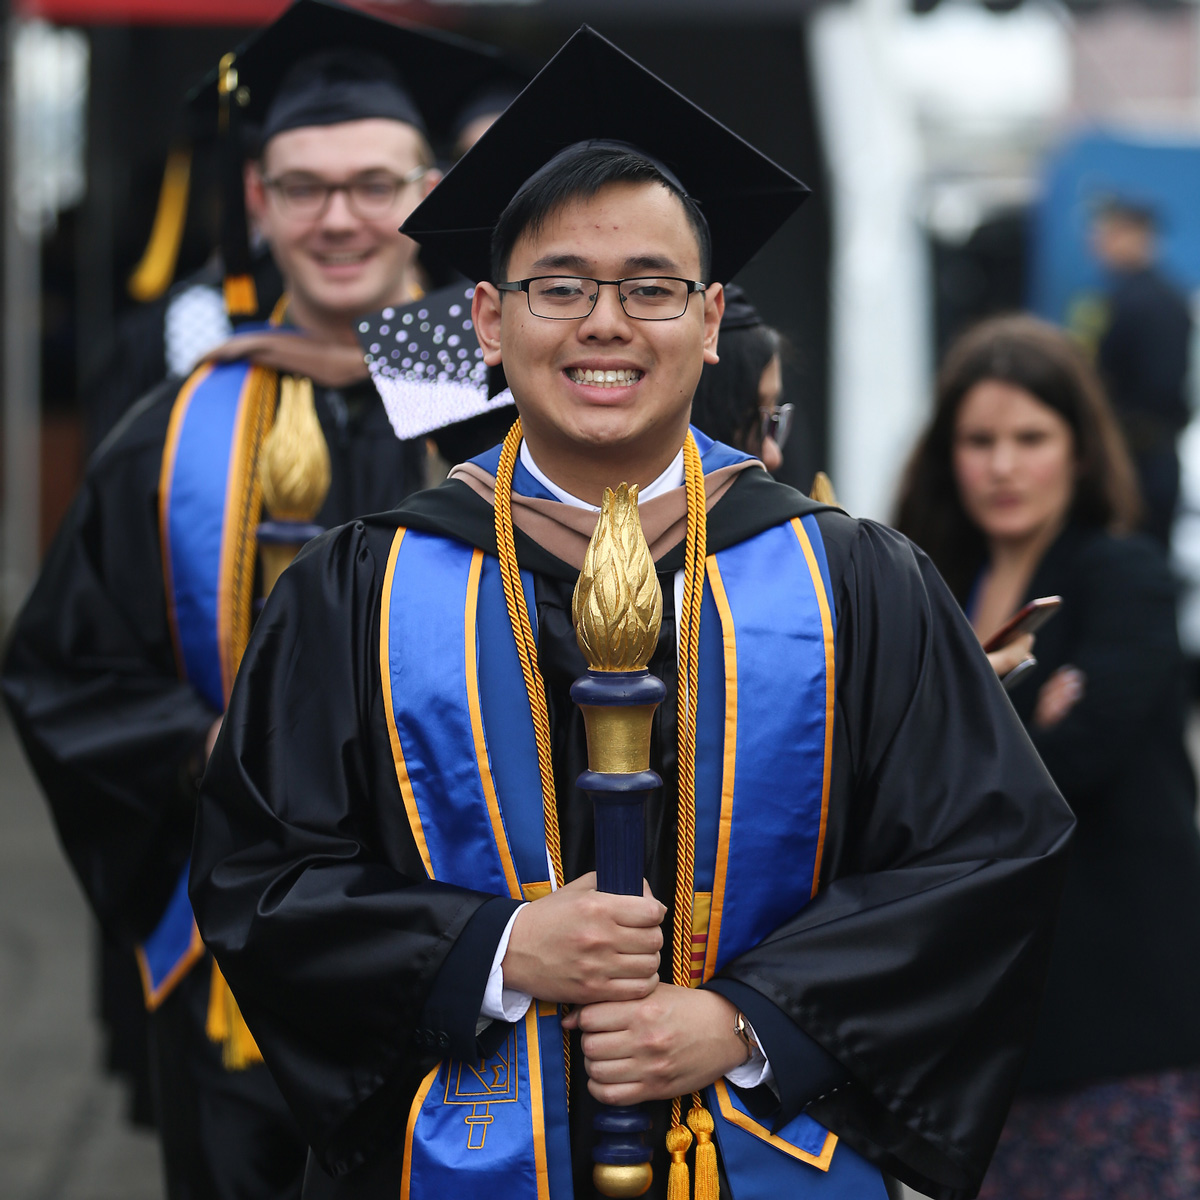 John carrying the torch leading the Commencement line wearing his cap and gown.